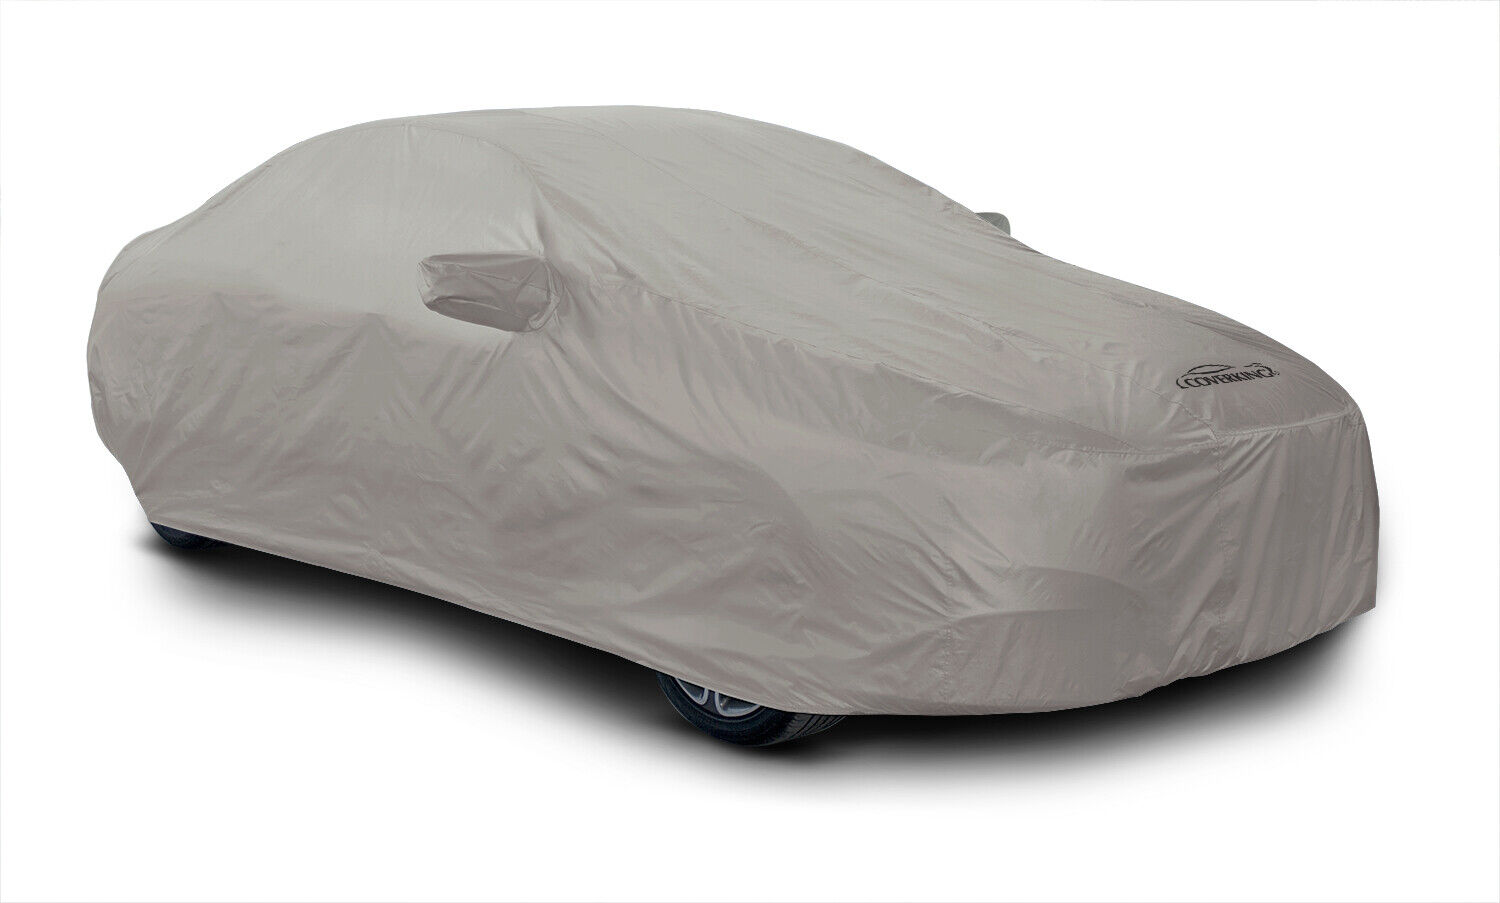 Coverking Autobody Armor Tailored Car Cover for Toyota Camry - Made to Order